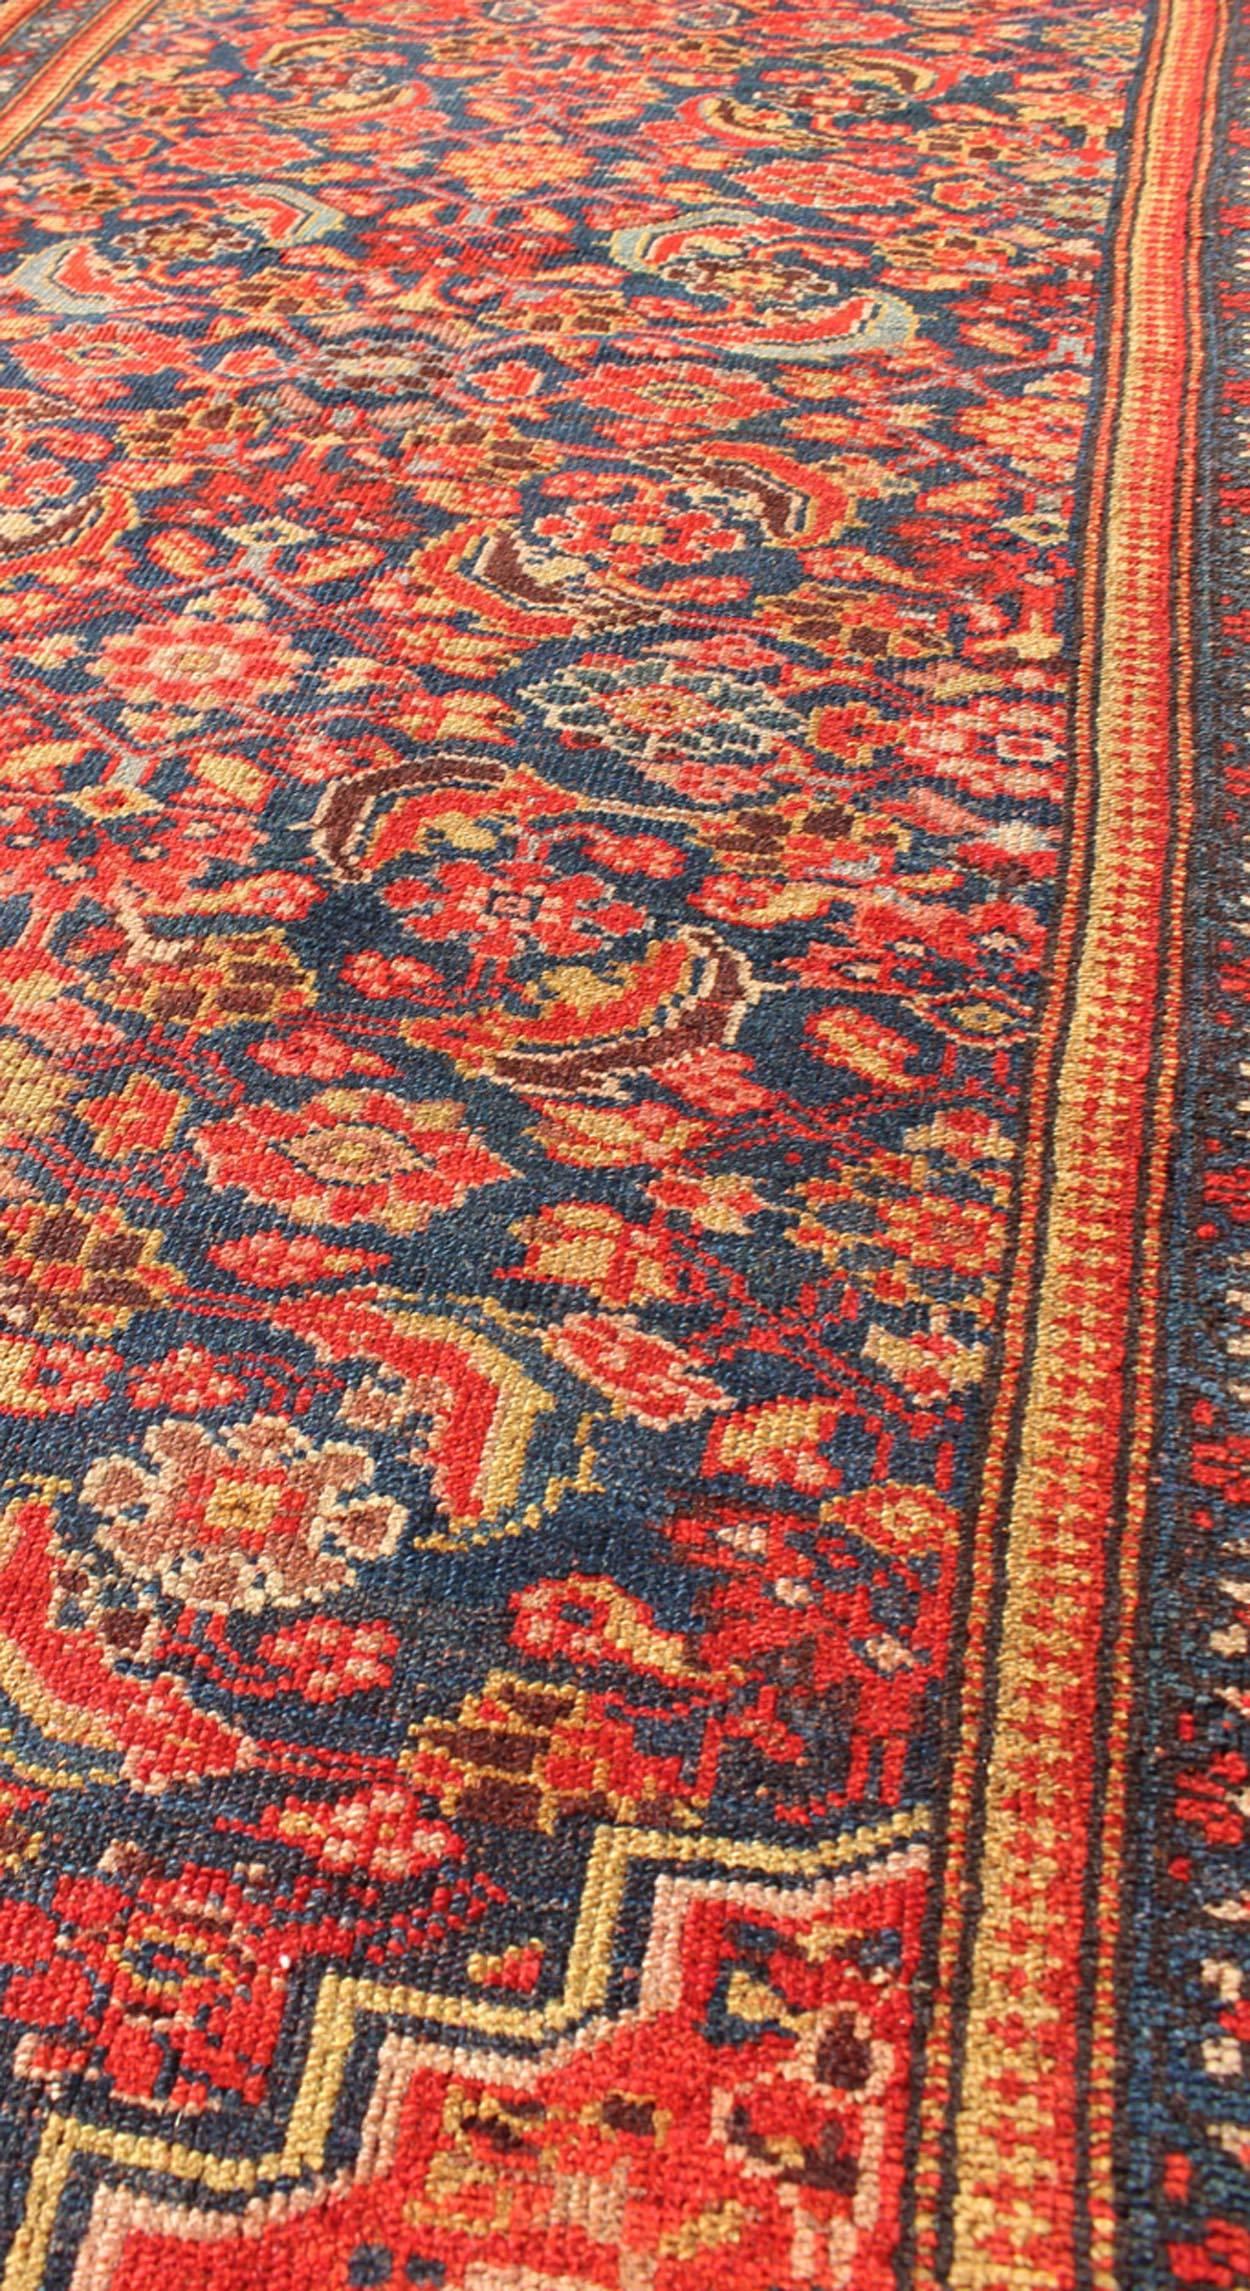 Early 20th Century Red and Blue Antique Persian Malayer Rug with All-Over Floral Design For Sale